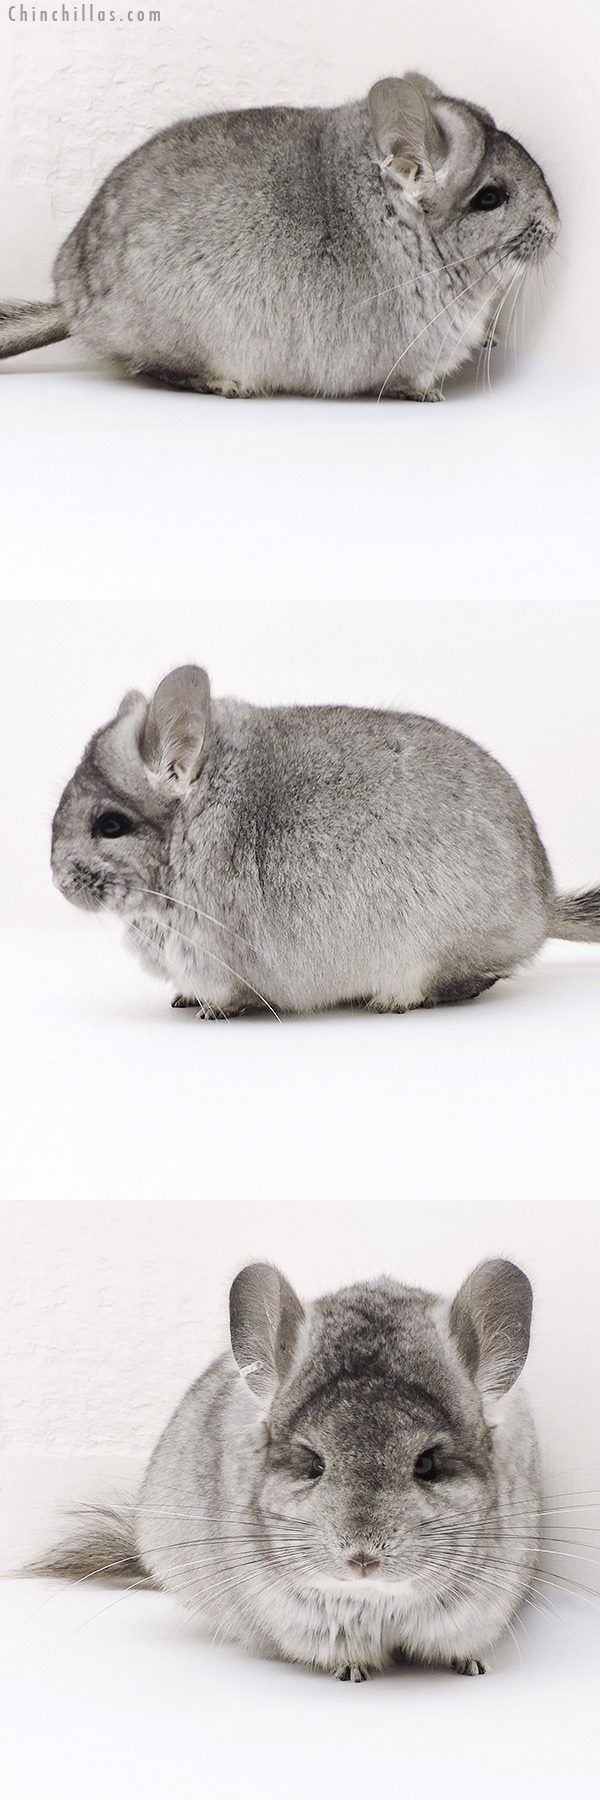 Chinchilla or related item offered for sale or export on Chinchillas.com - 17336 Blocky Standard  Royal Persian Angora Female Chinchilla